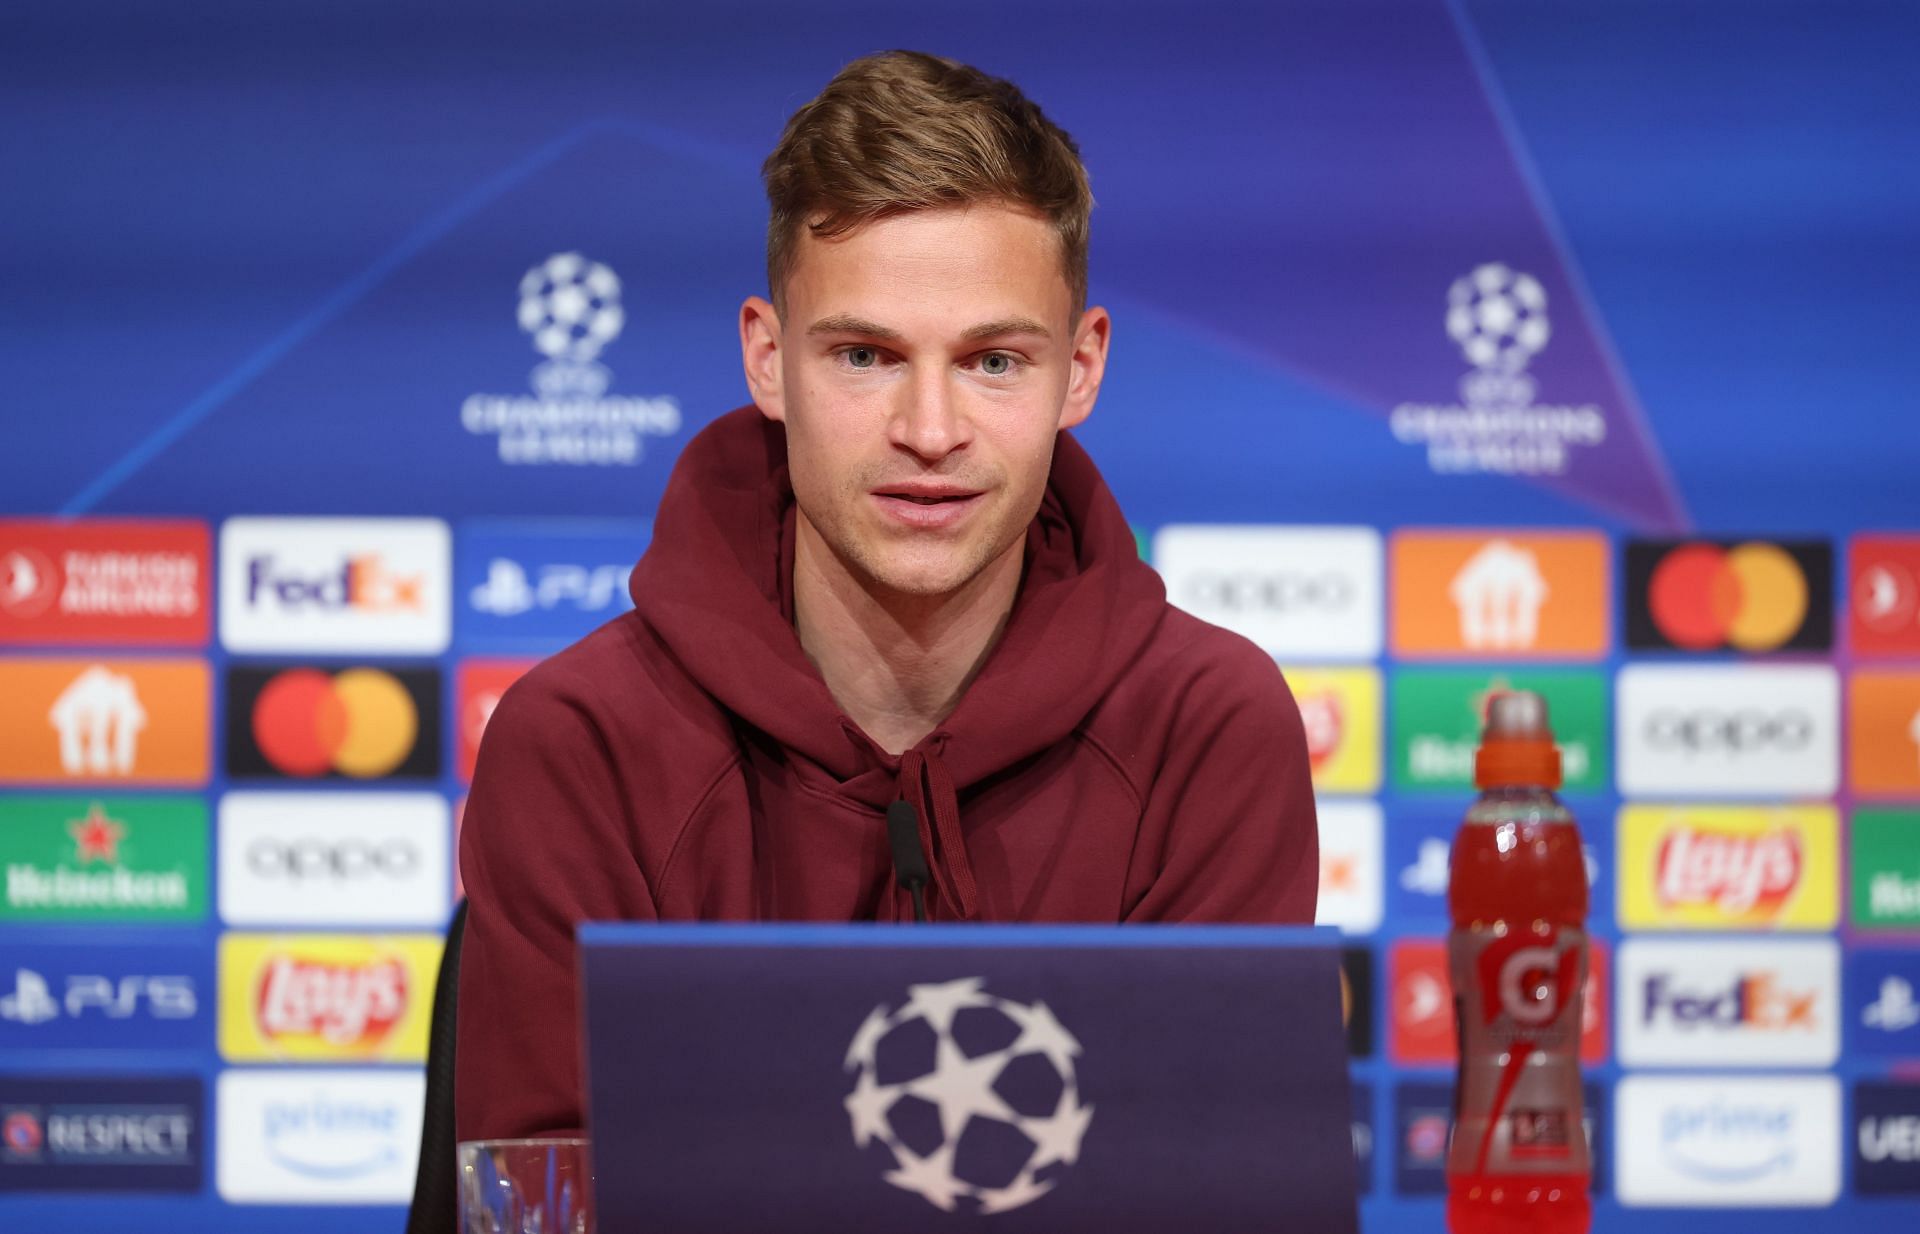 Joshua Kimmich wants to move to Camp Nou